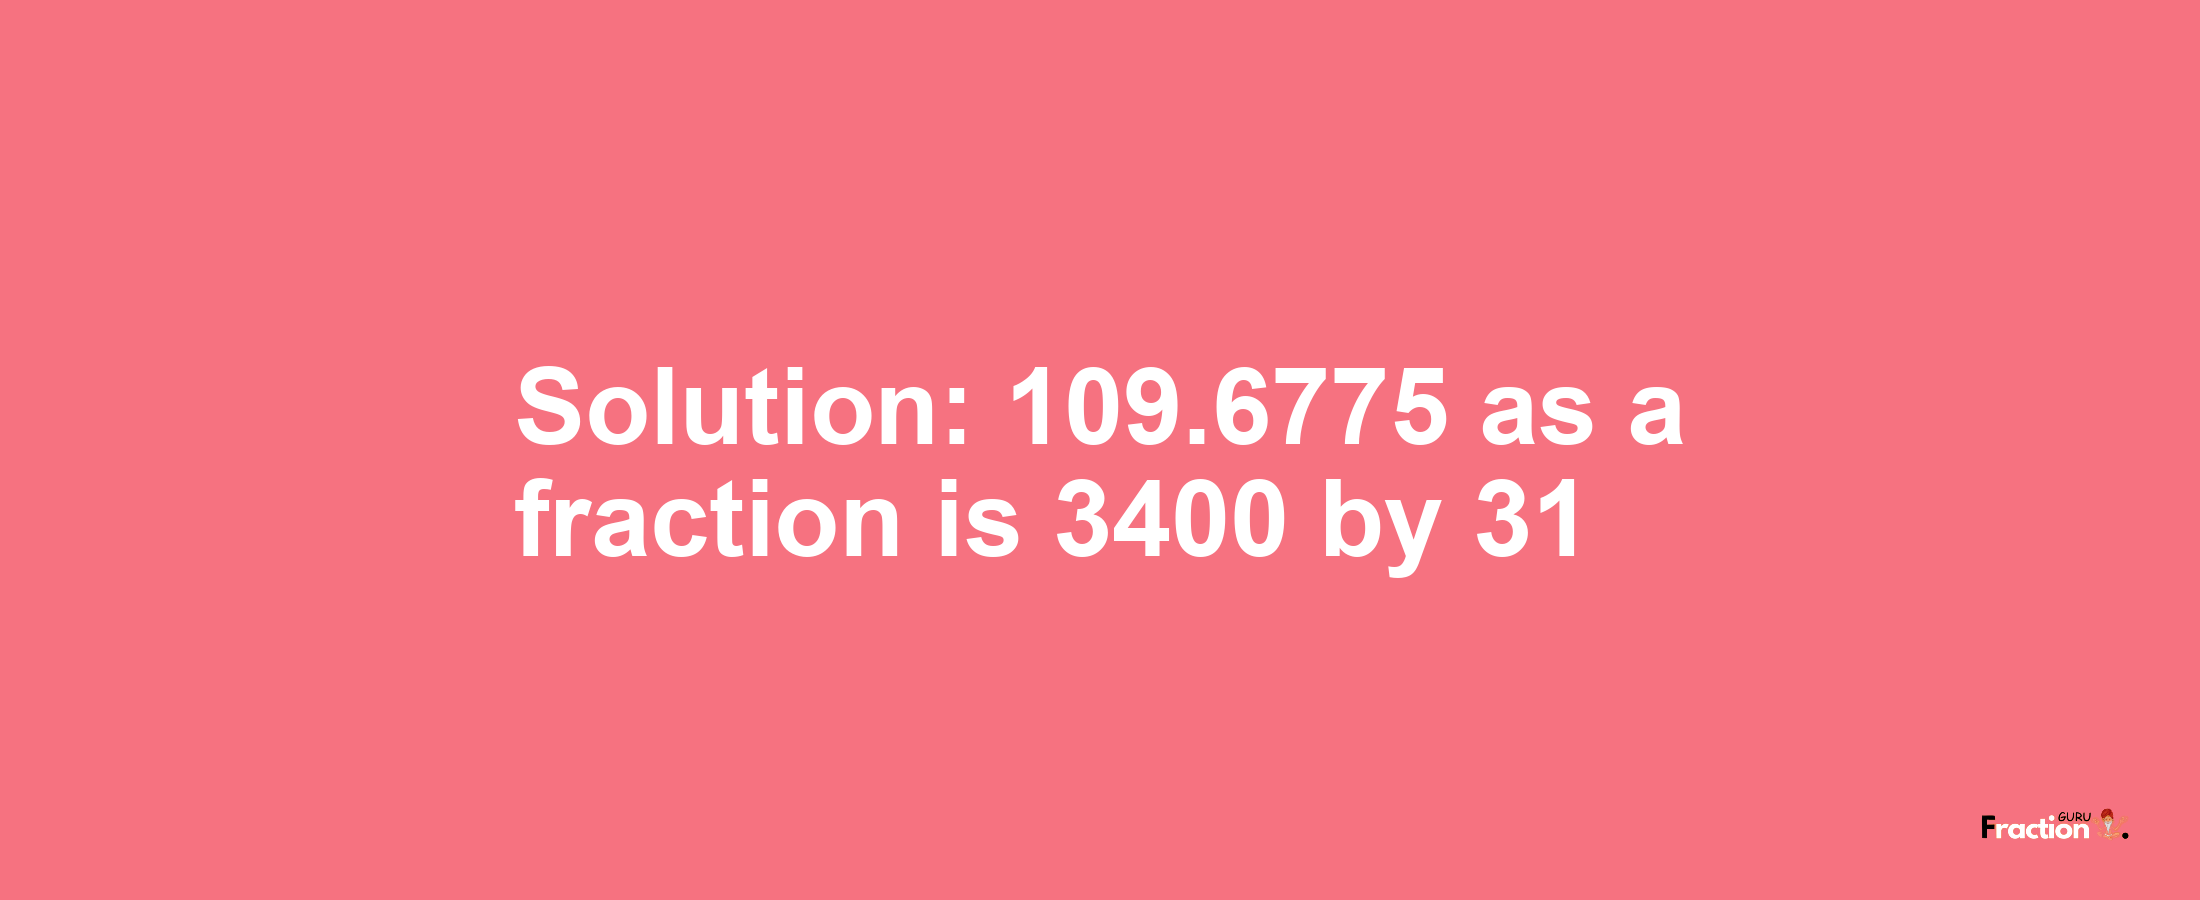 Solution:109.6775 as a fraction is 3400/31